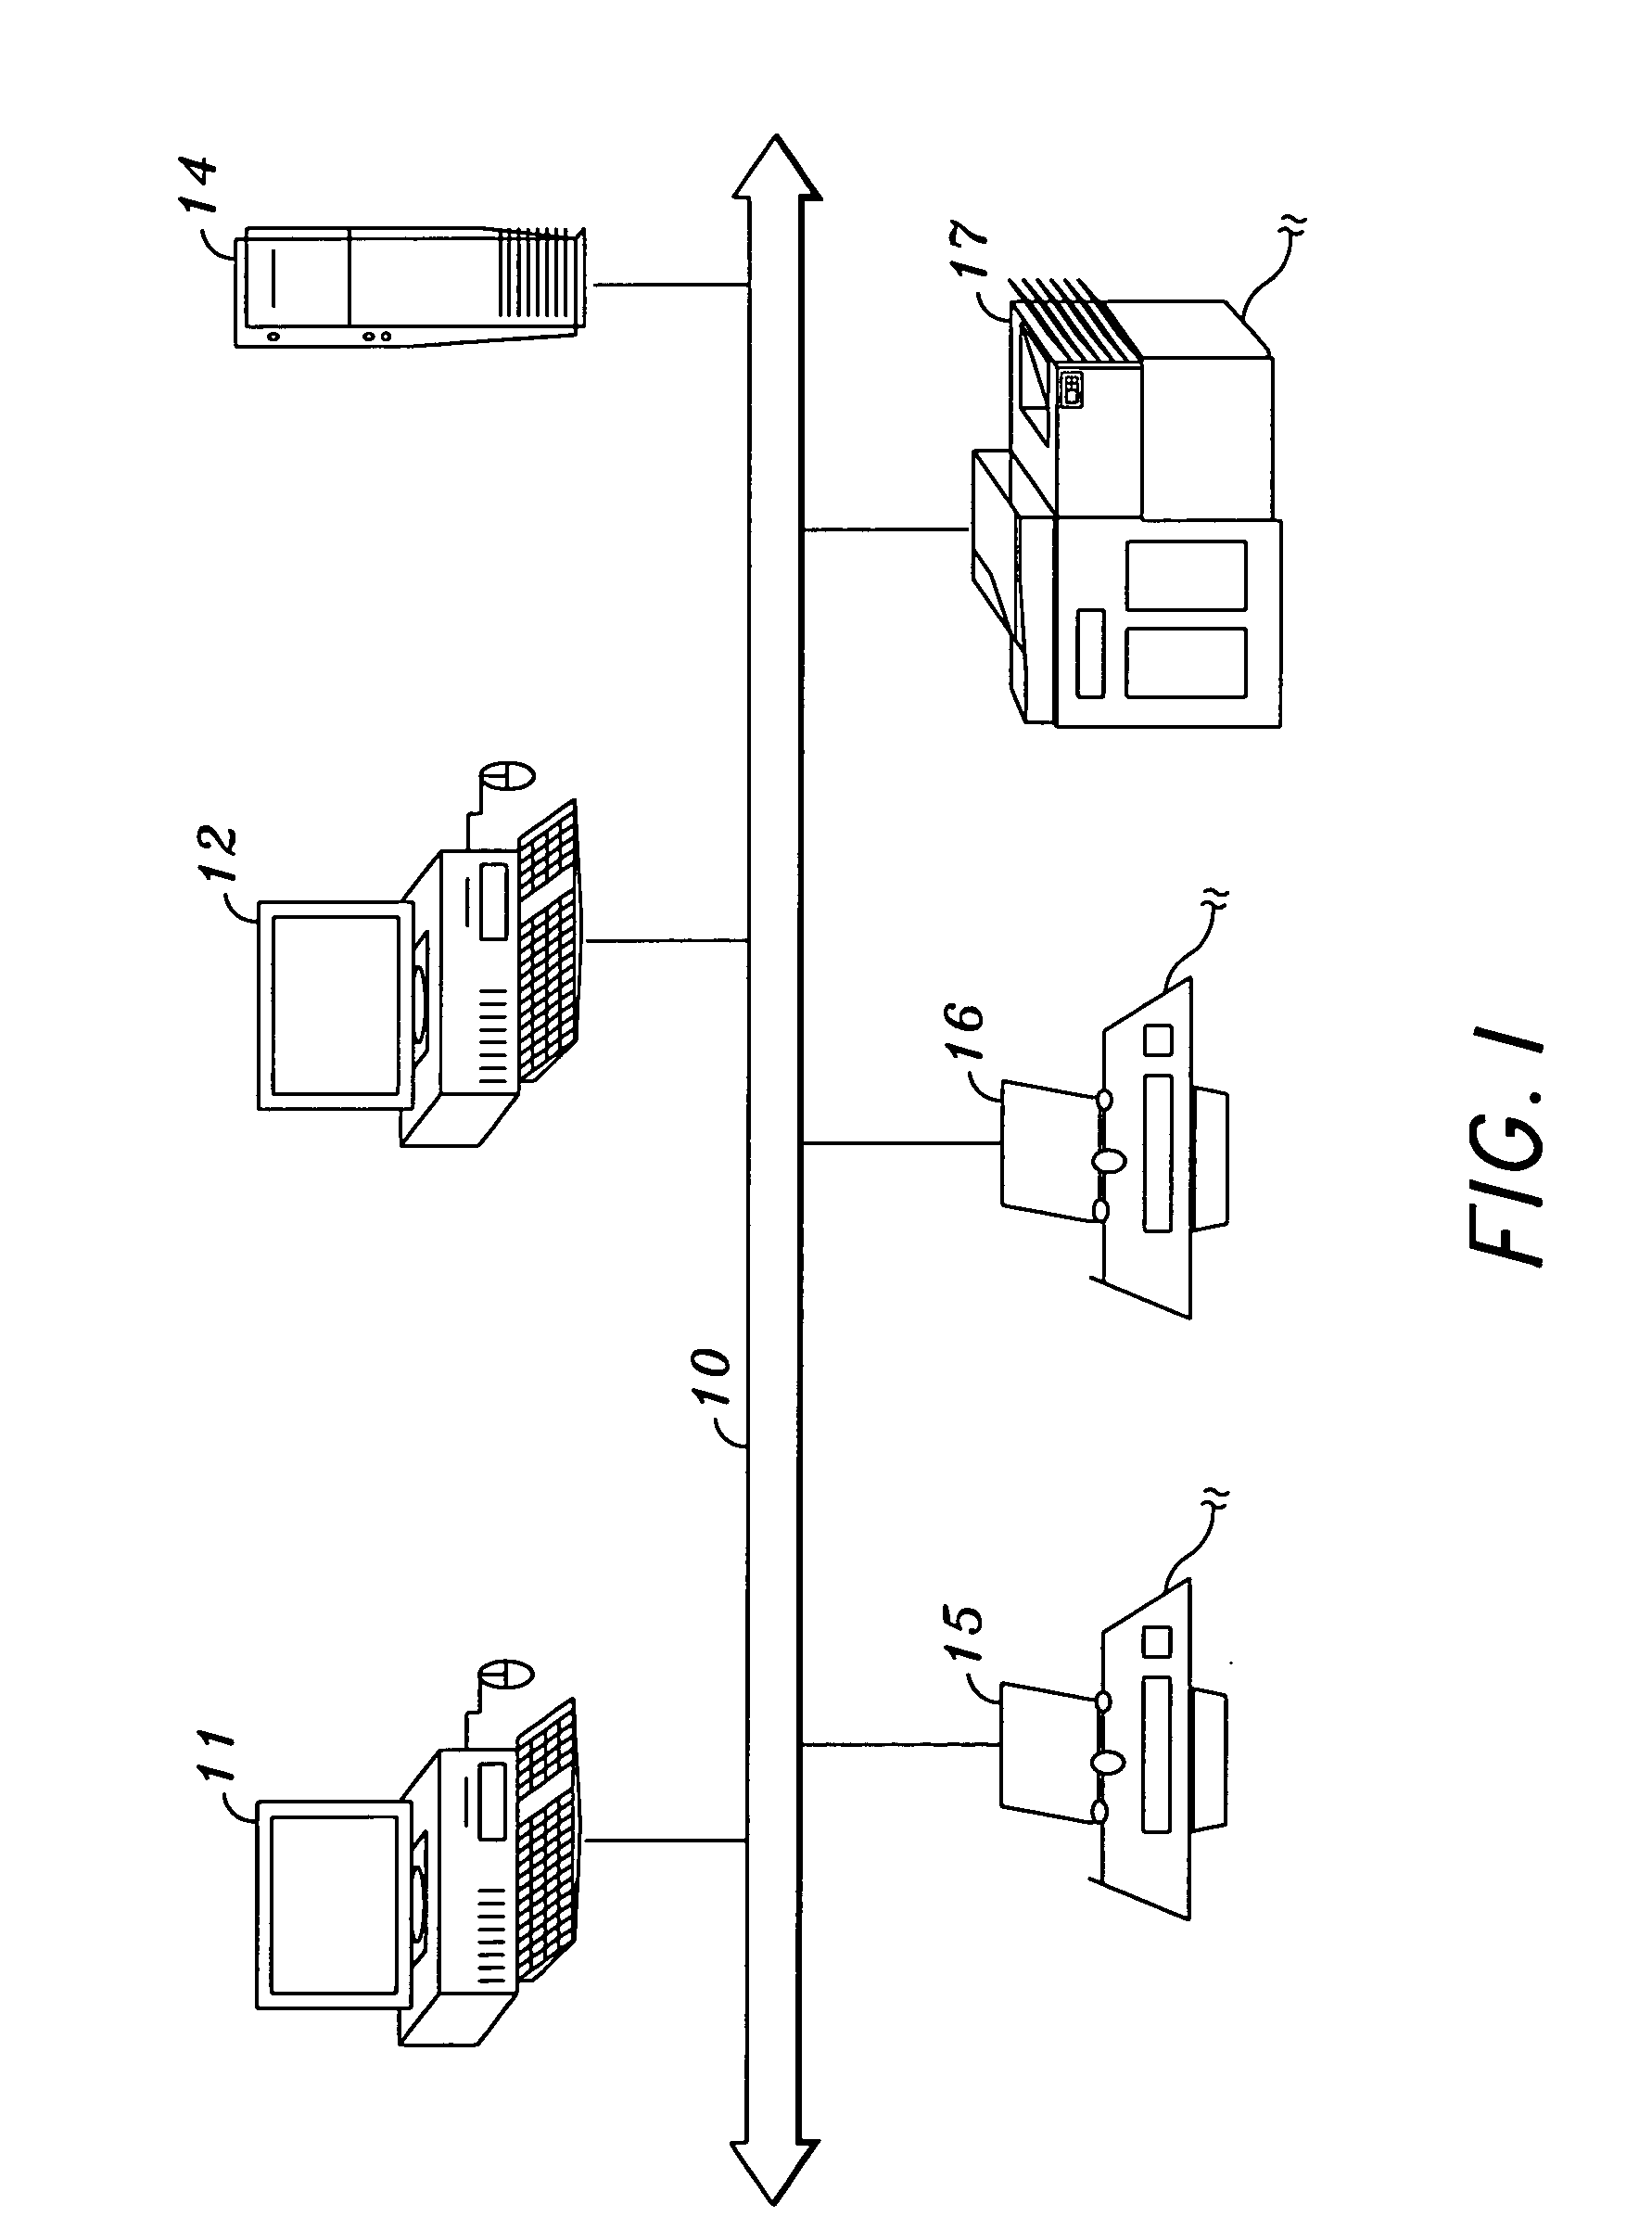 Dynamic network device reconfiguration